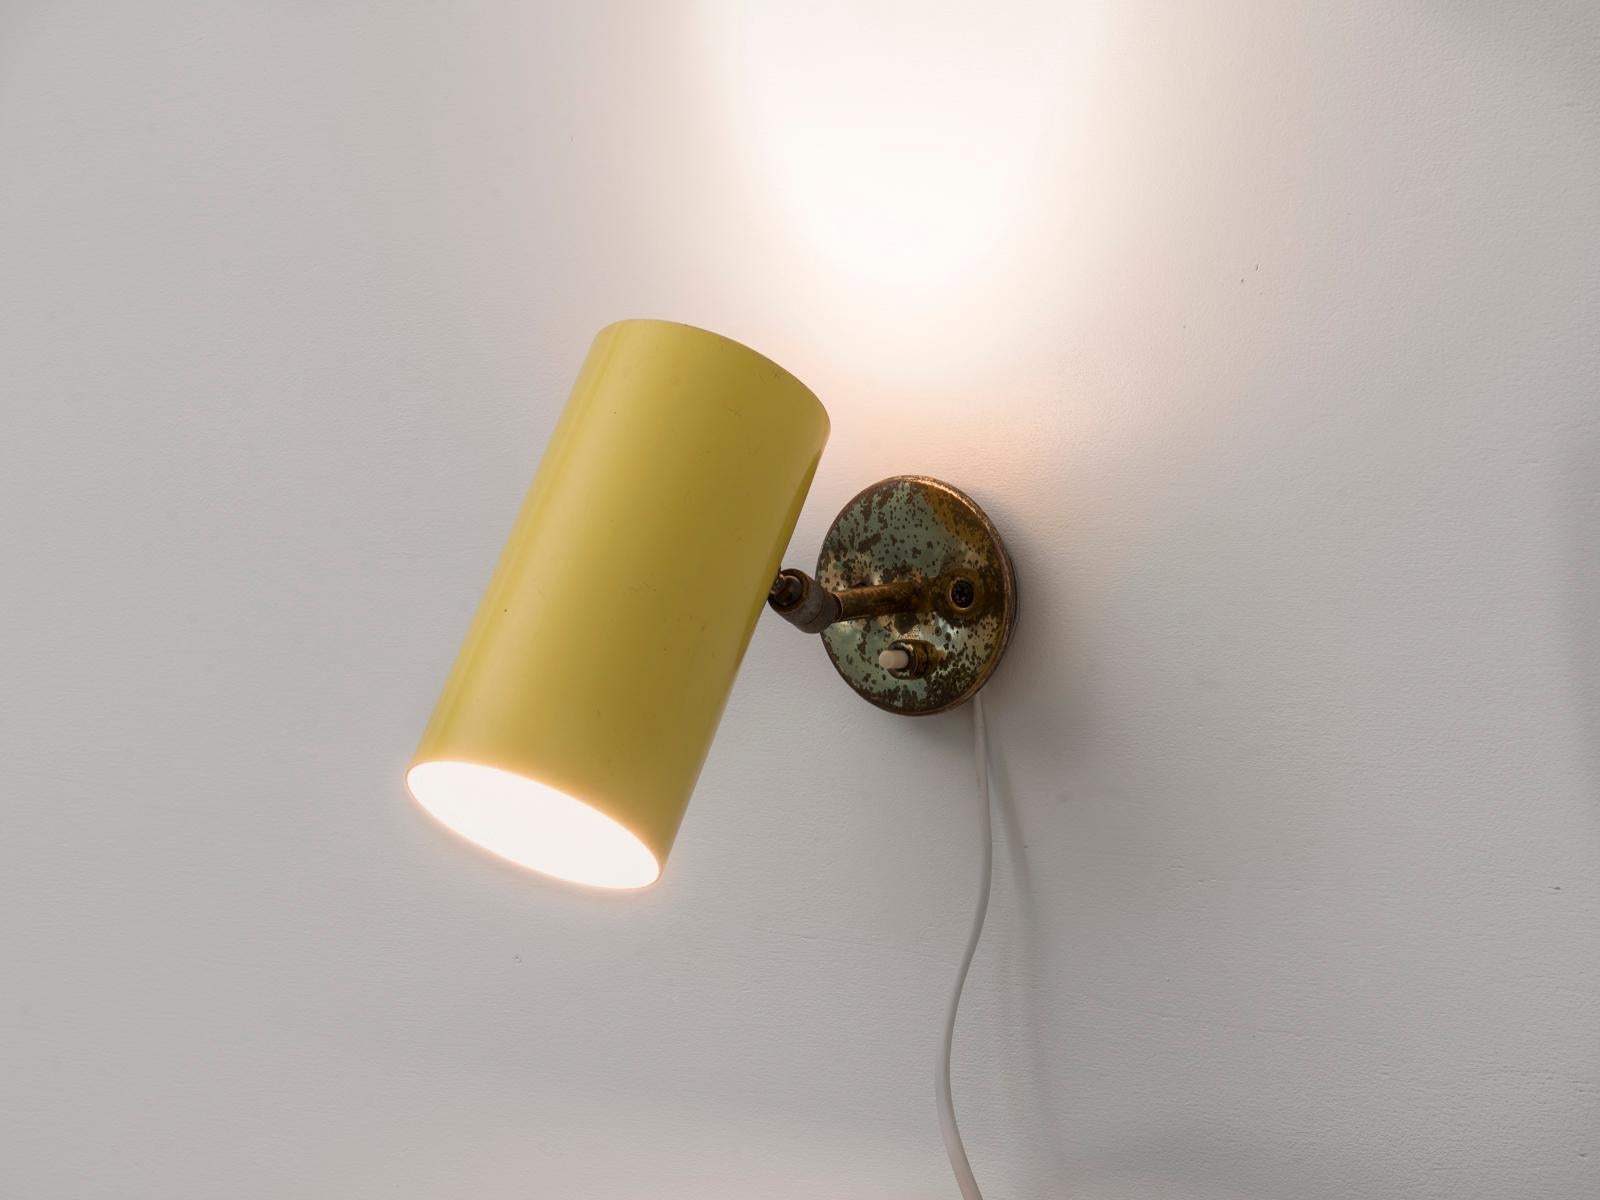 This fully directable wall light was designed by Italian lighting master Gino Sarfatti for his own company Arteluce in the 1950s. This model was mostly manufactured in black or cream white color, this yellow version is rarer (and documented). The